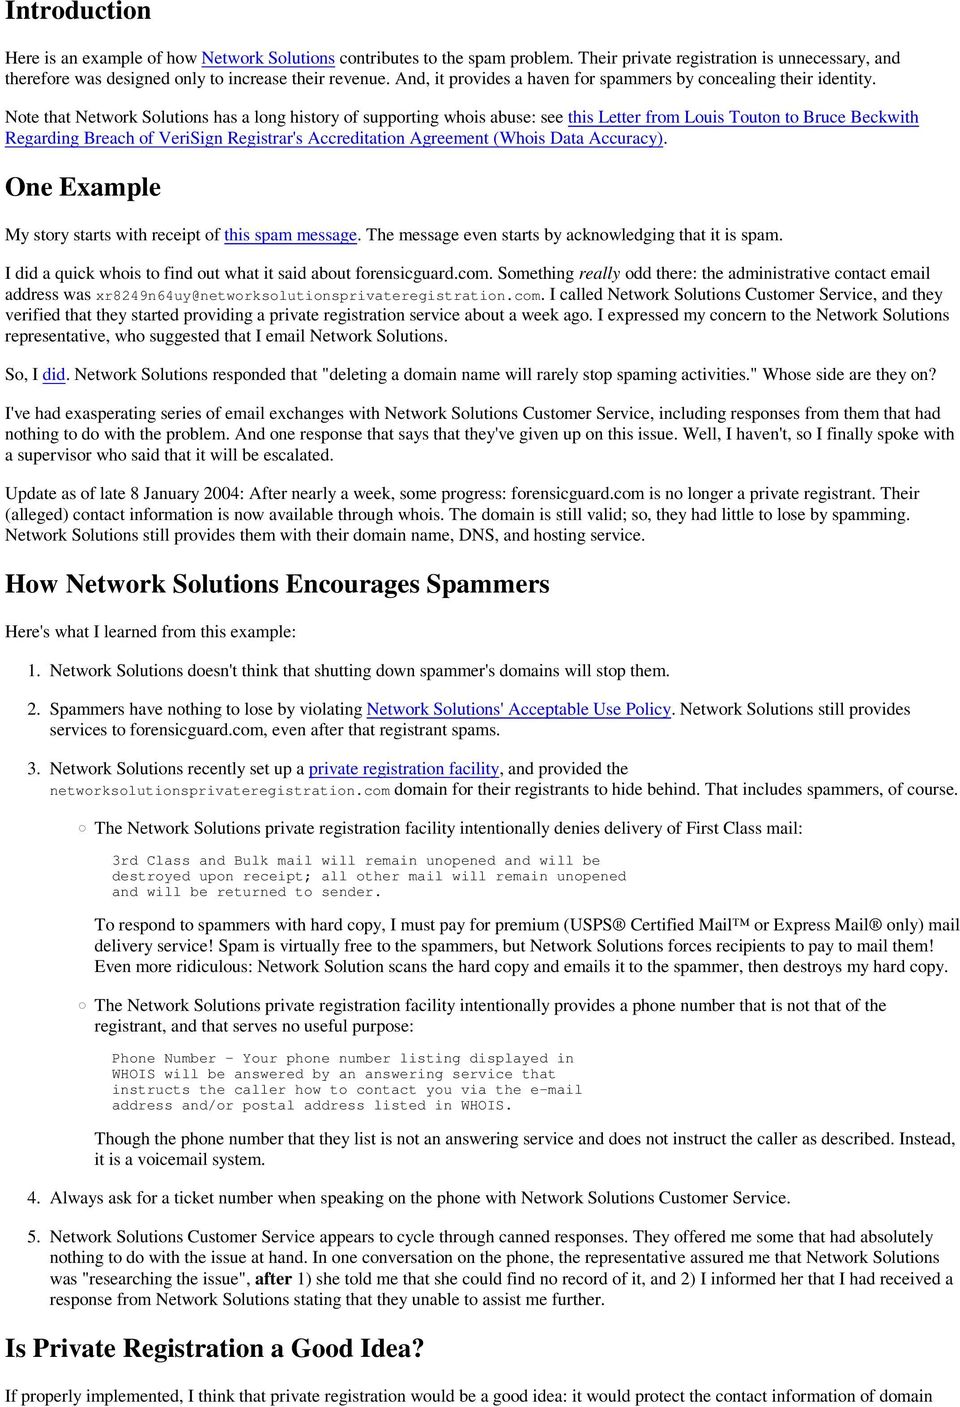 Note that Network Solutions has a long history of supporting whois abuse: see this Letter from Louis Touton to Bruce Beckwith Regarding Breach of VeriSign Registrar's Accreditation Agreement (Whois